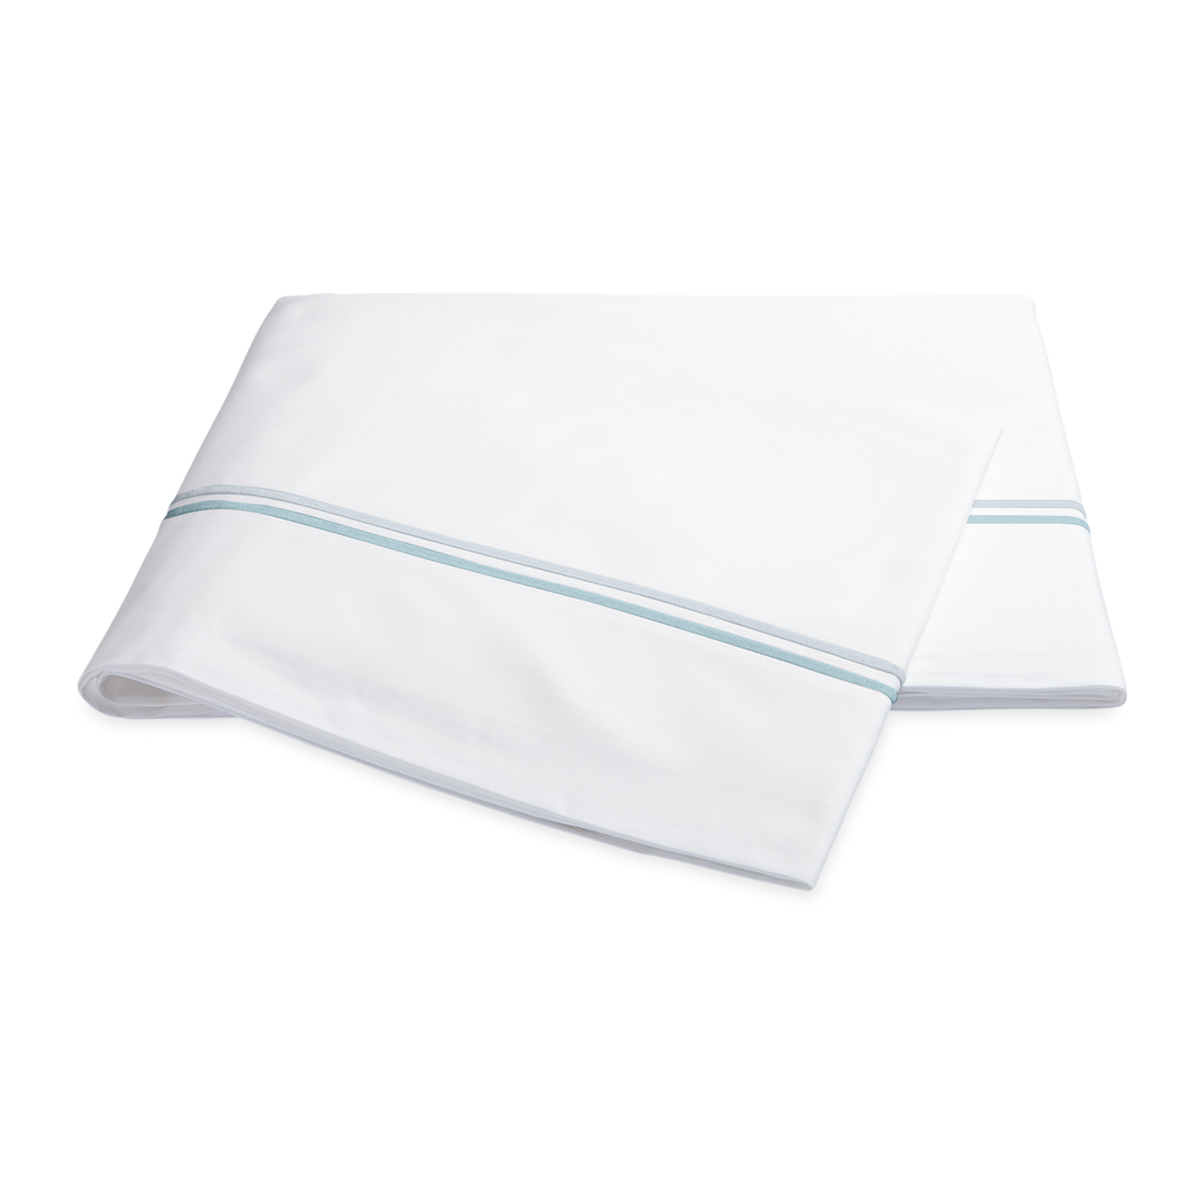 Flat Sheet of Matouk Essex Bedding Collection in Pool Color